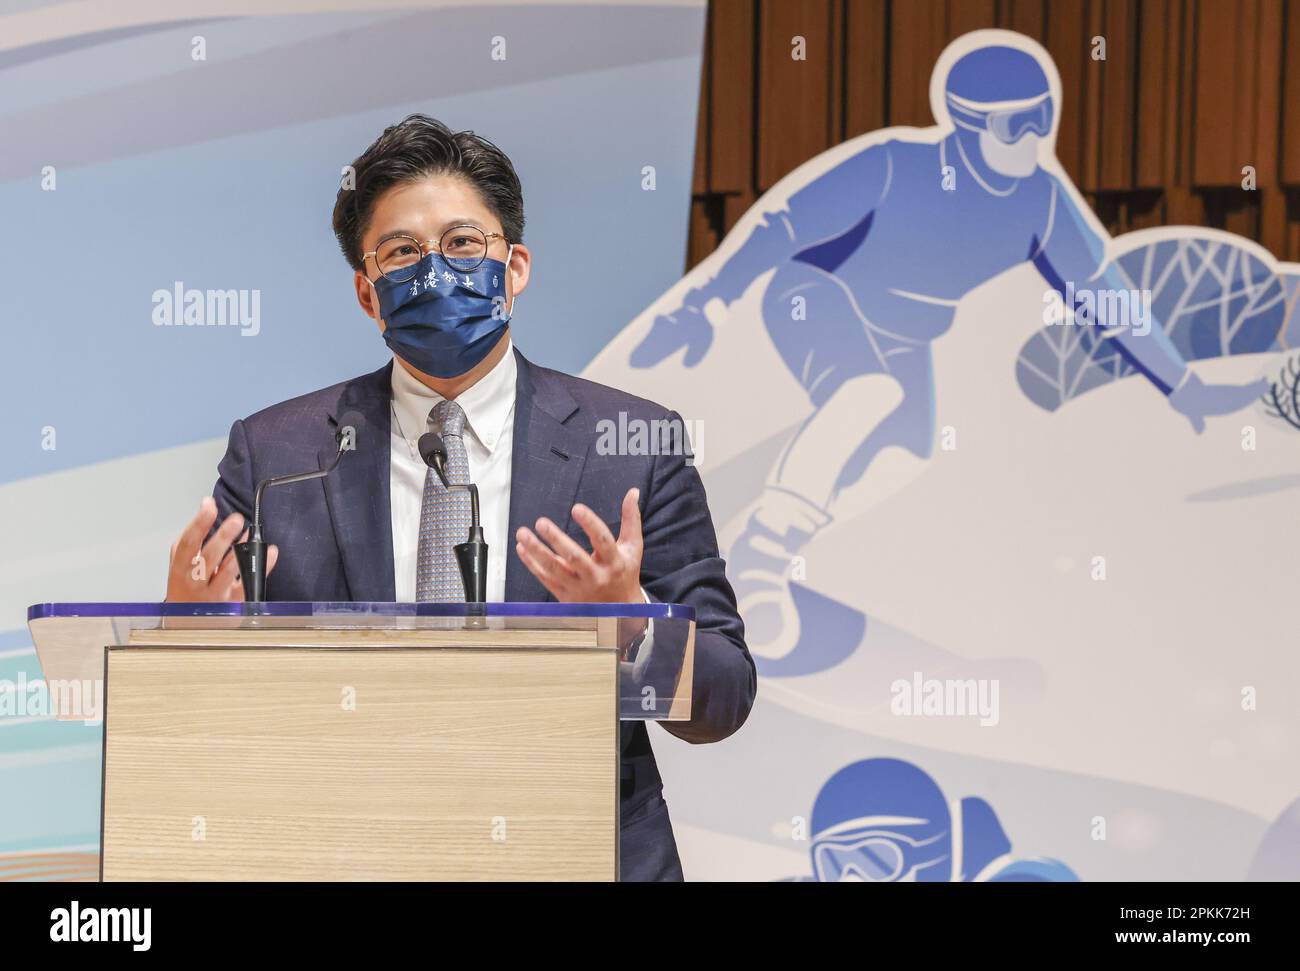 Kenneth FOK Kai-kong, speaks at the Conversation with the National Winter Olympic Team at HKUST; Fok is the Vice-President of the Sports Federation & Olympic Committee of Hong Kong.  19JUL22 SCMP / K. Y. Cheng Stock Photo